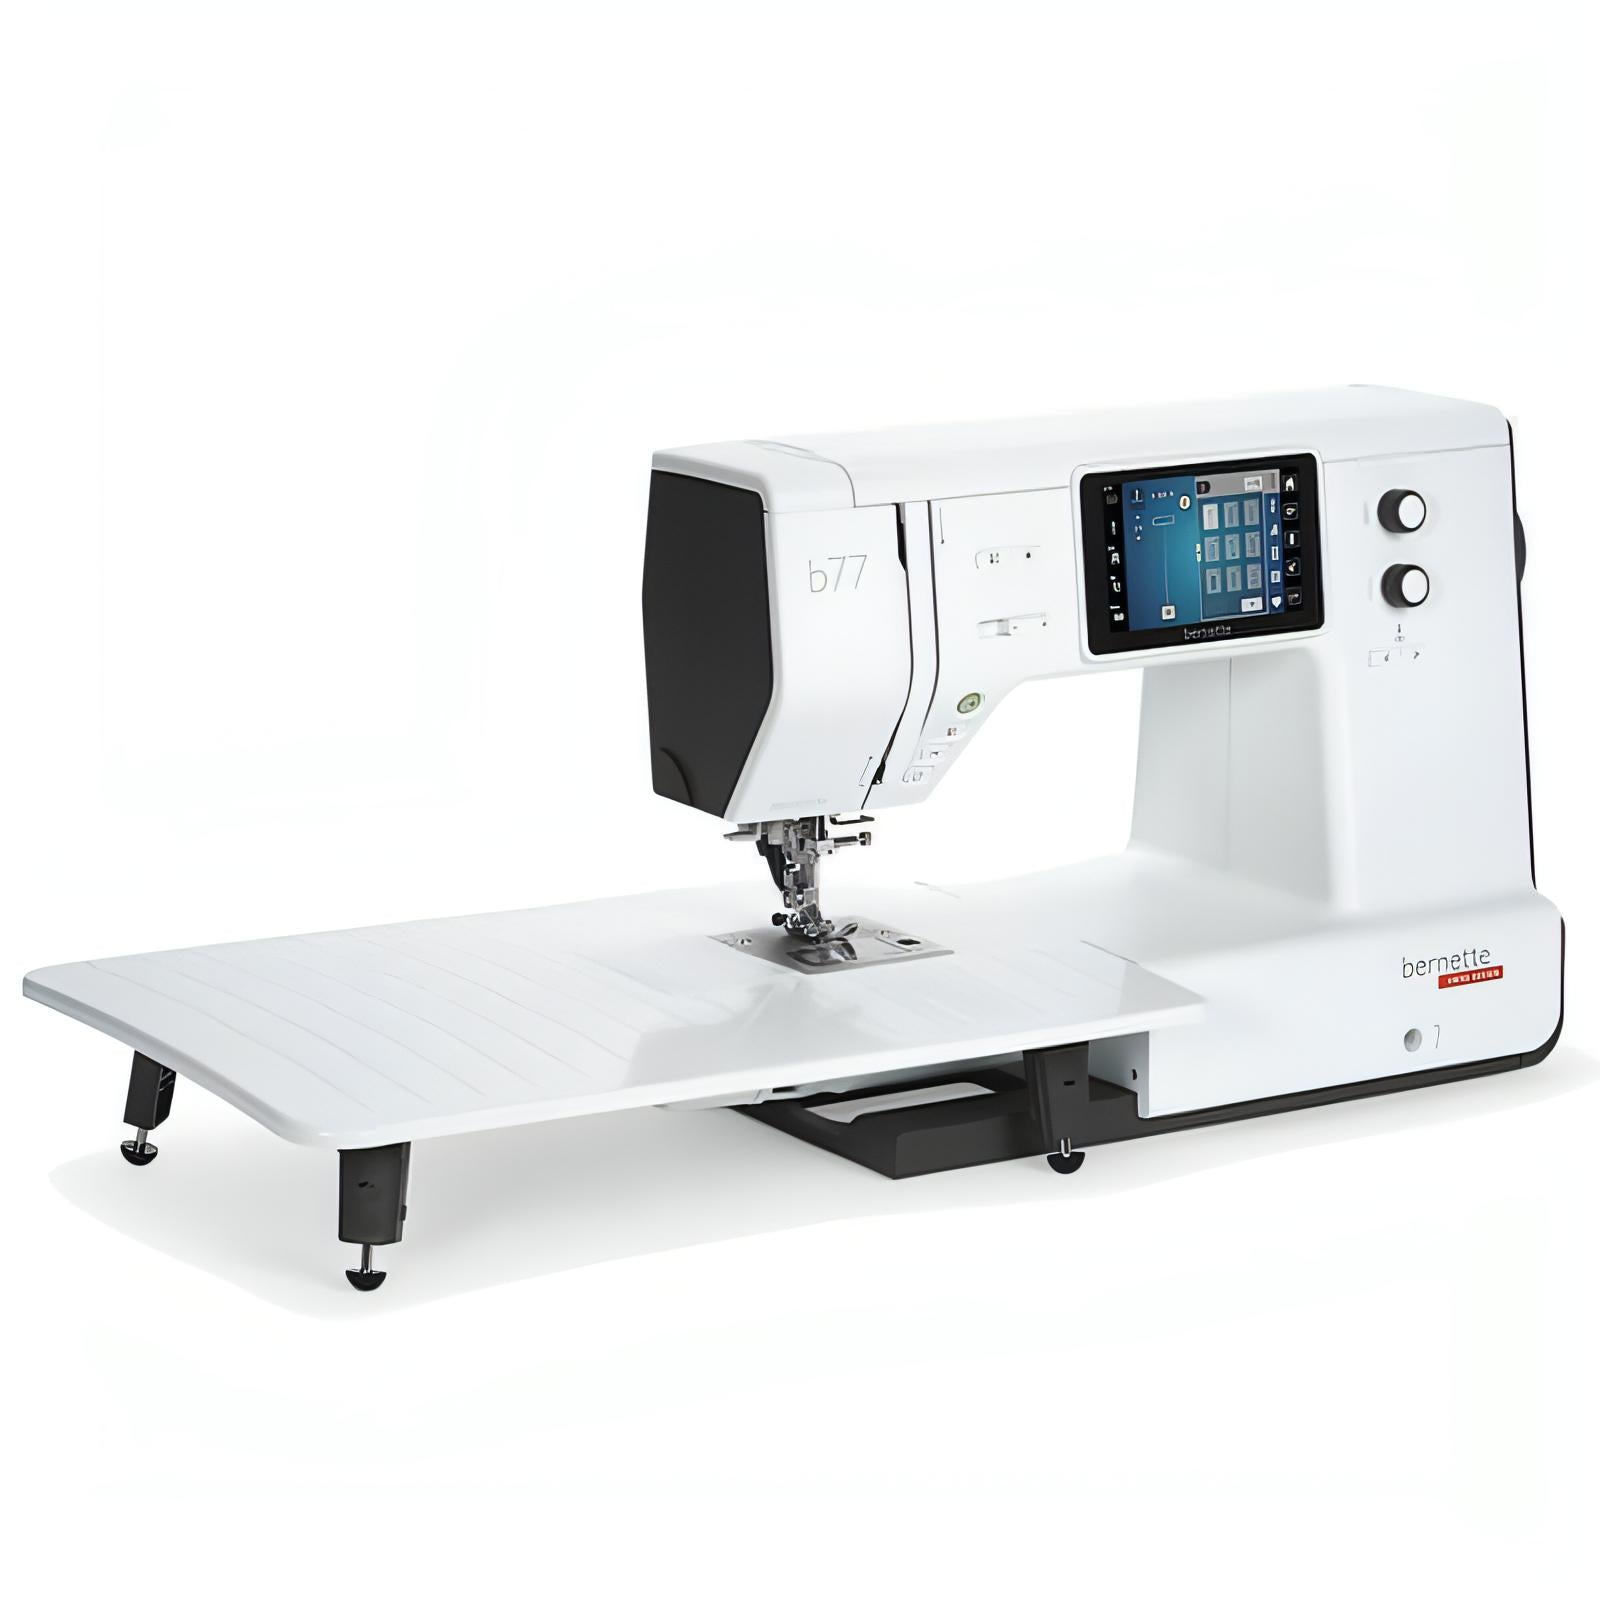 bernette by BERNINA B77 Sewing and Quilting Machine - 9 inch long arm